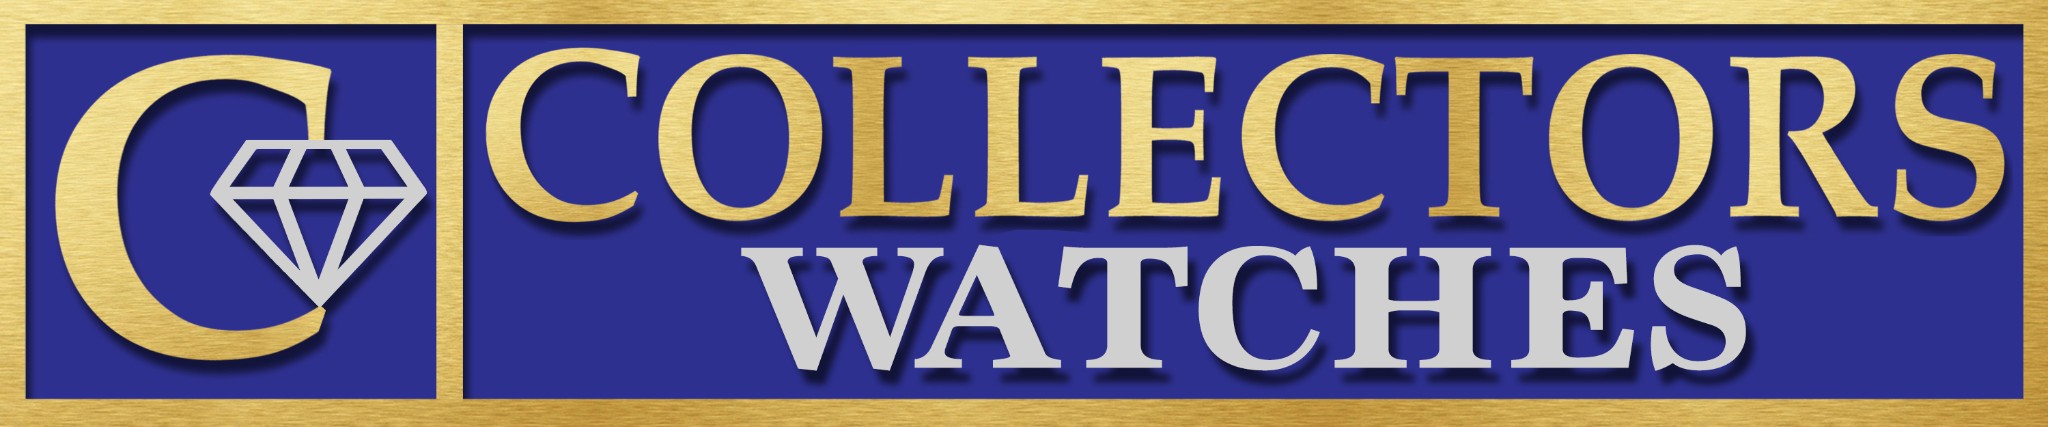 collectors watches logo